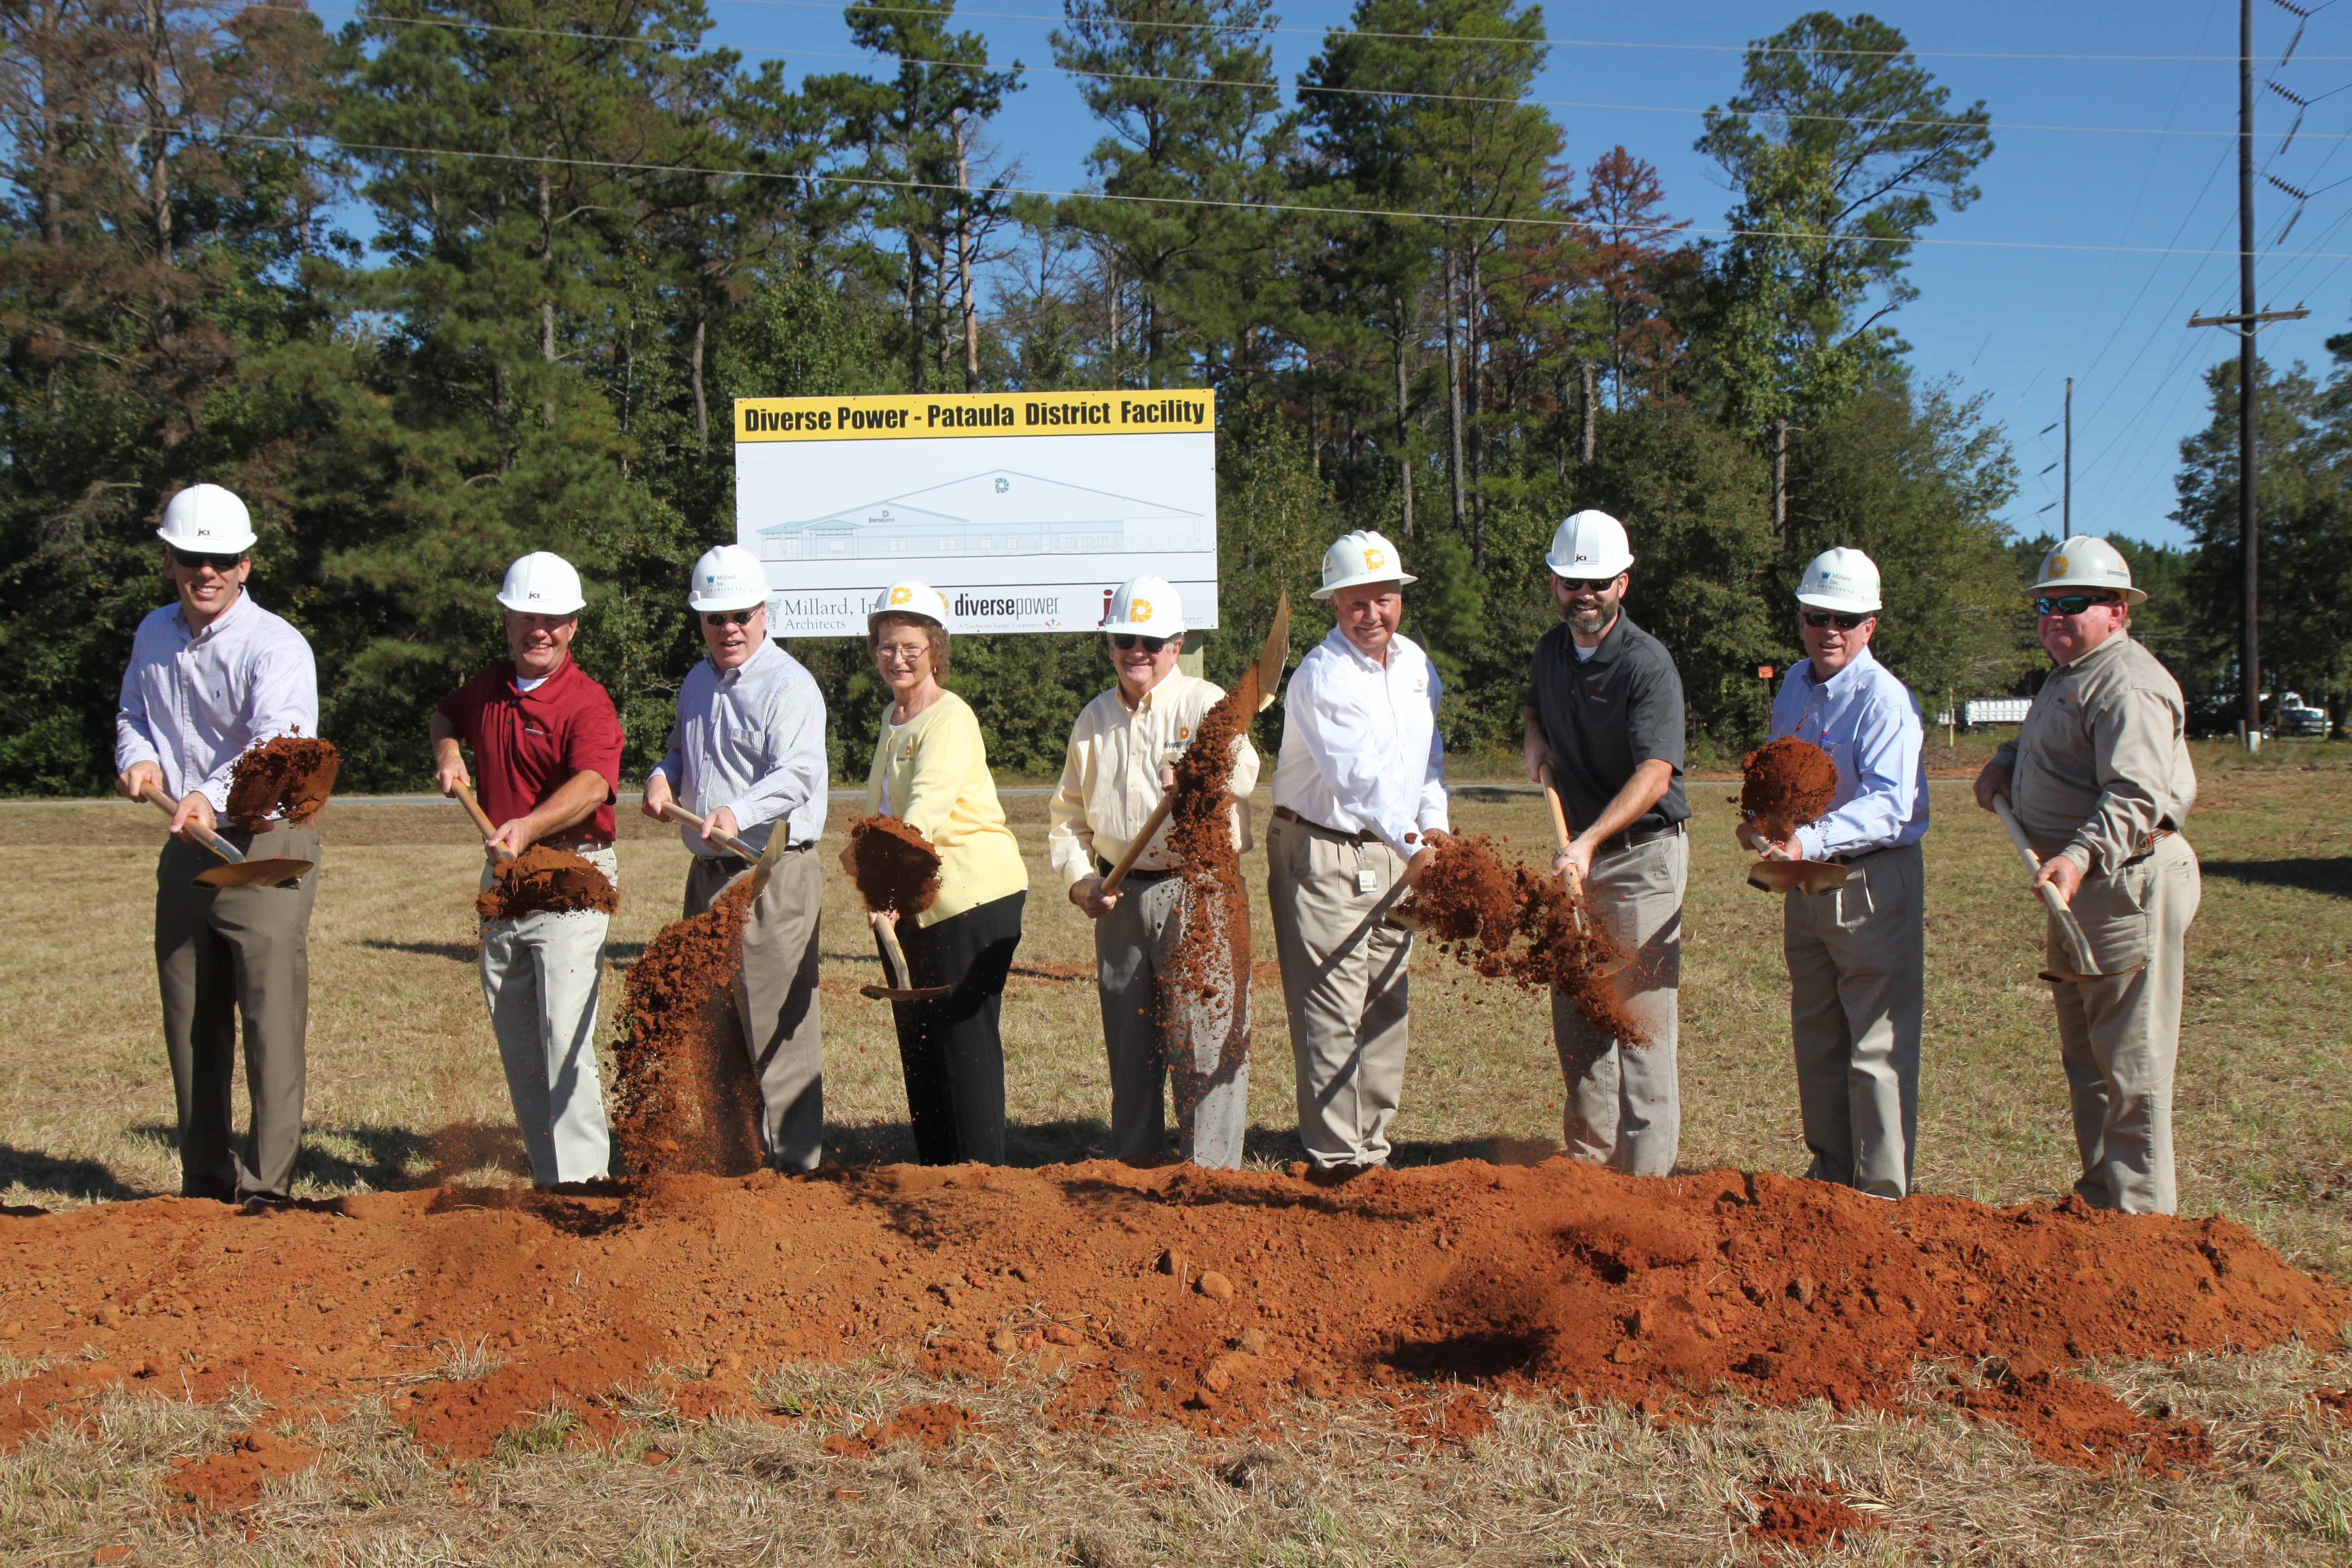 Groundbreaking Held at Diverse Power’s Pataula District Office